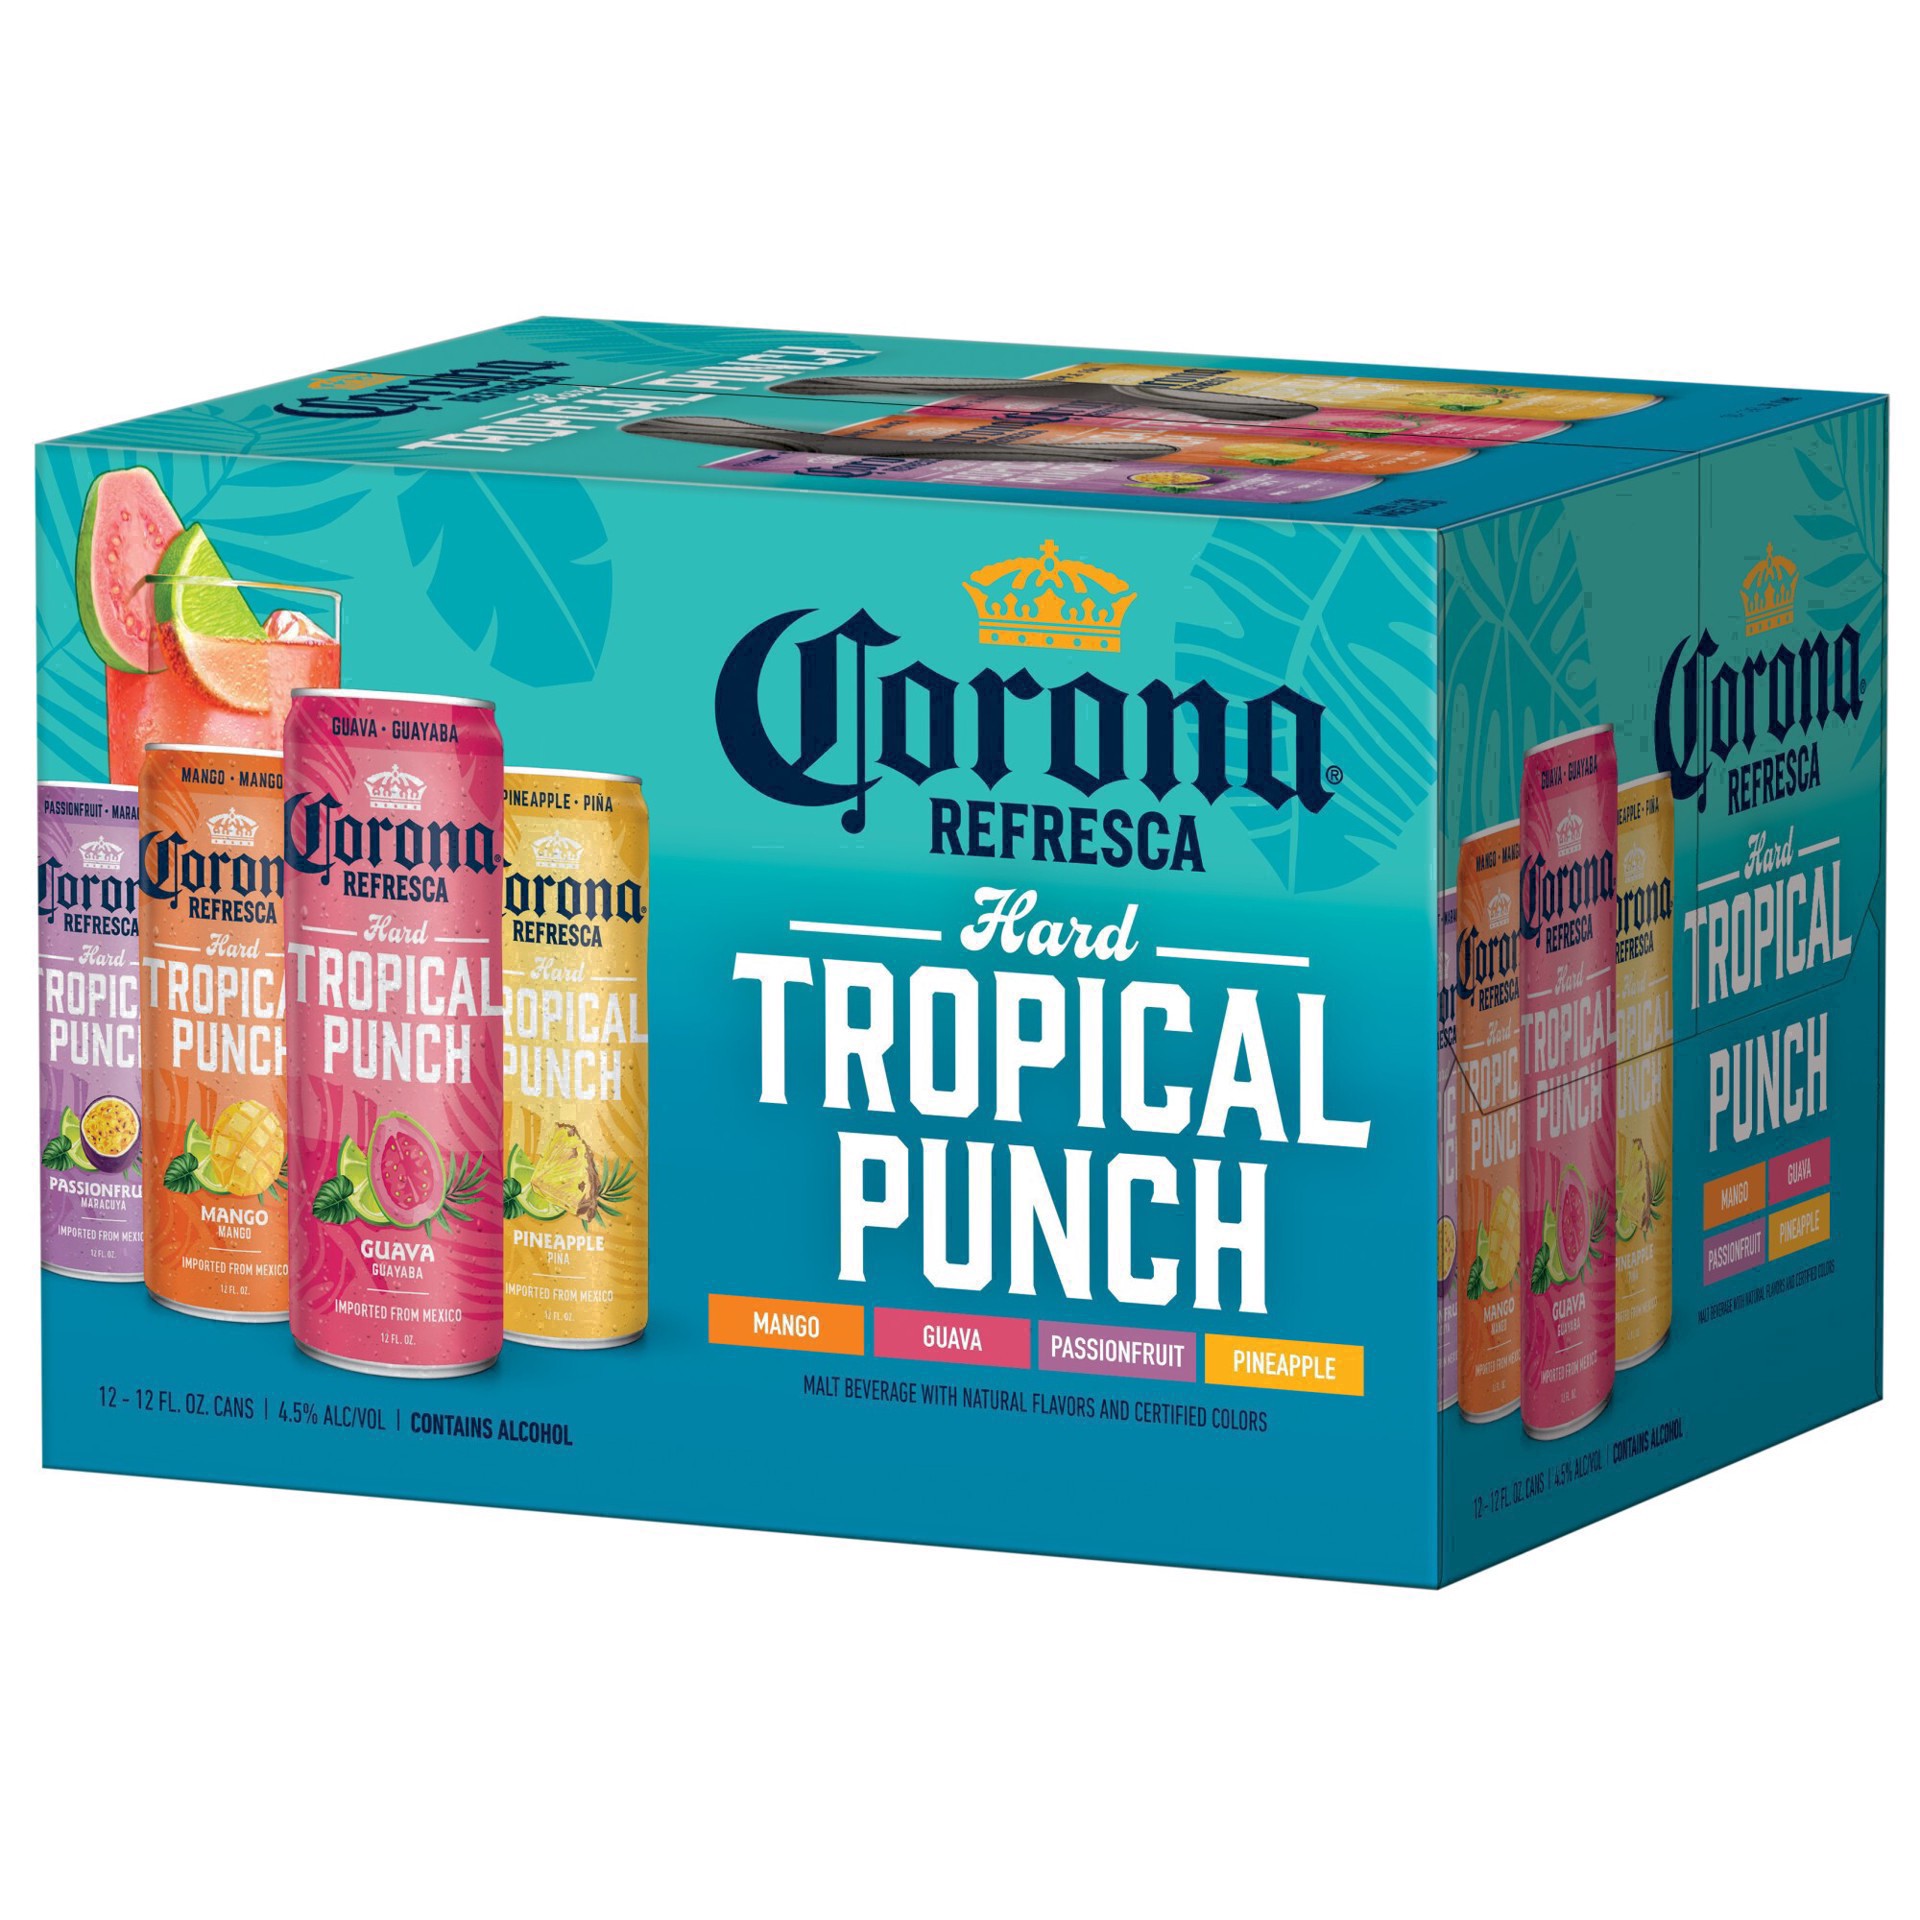 slide 92 of 113, Corona Refresca Hard Tropical Punch Variety Pack Cans, 144 fl oz